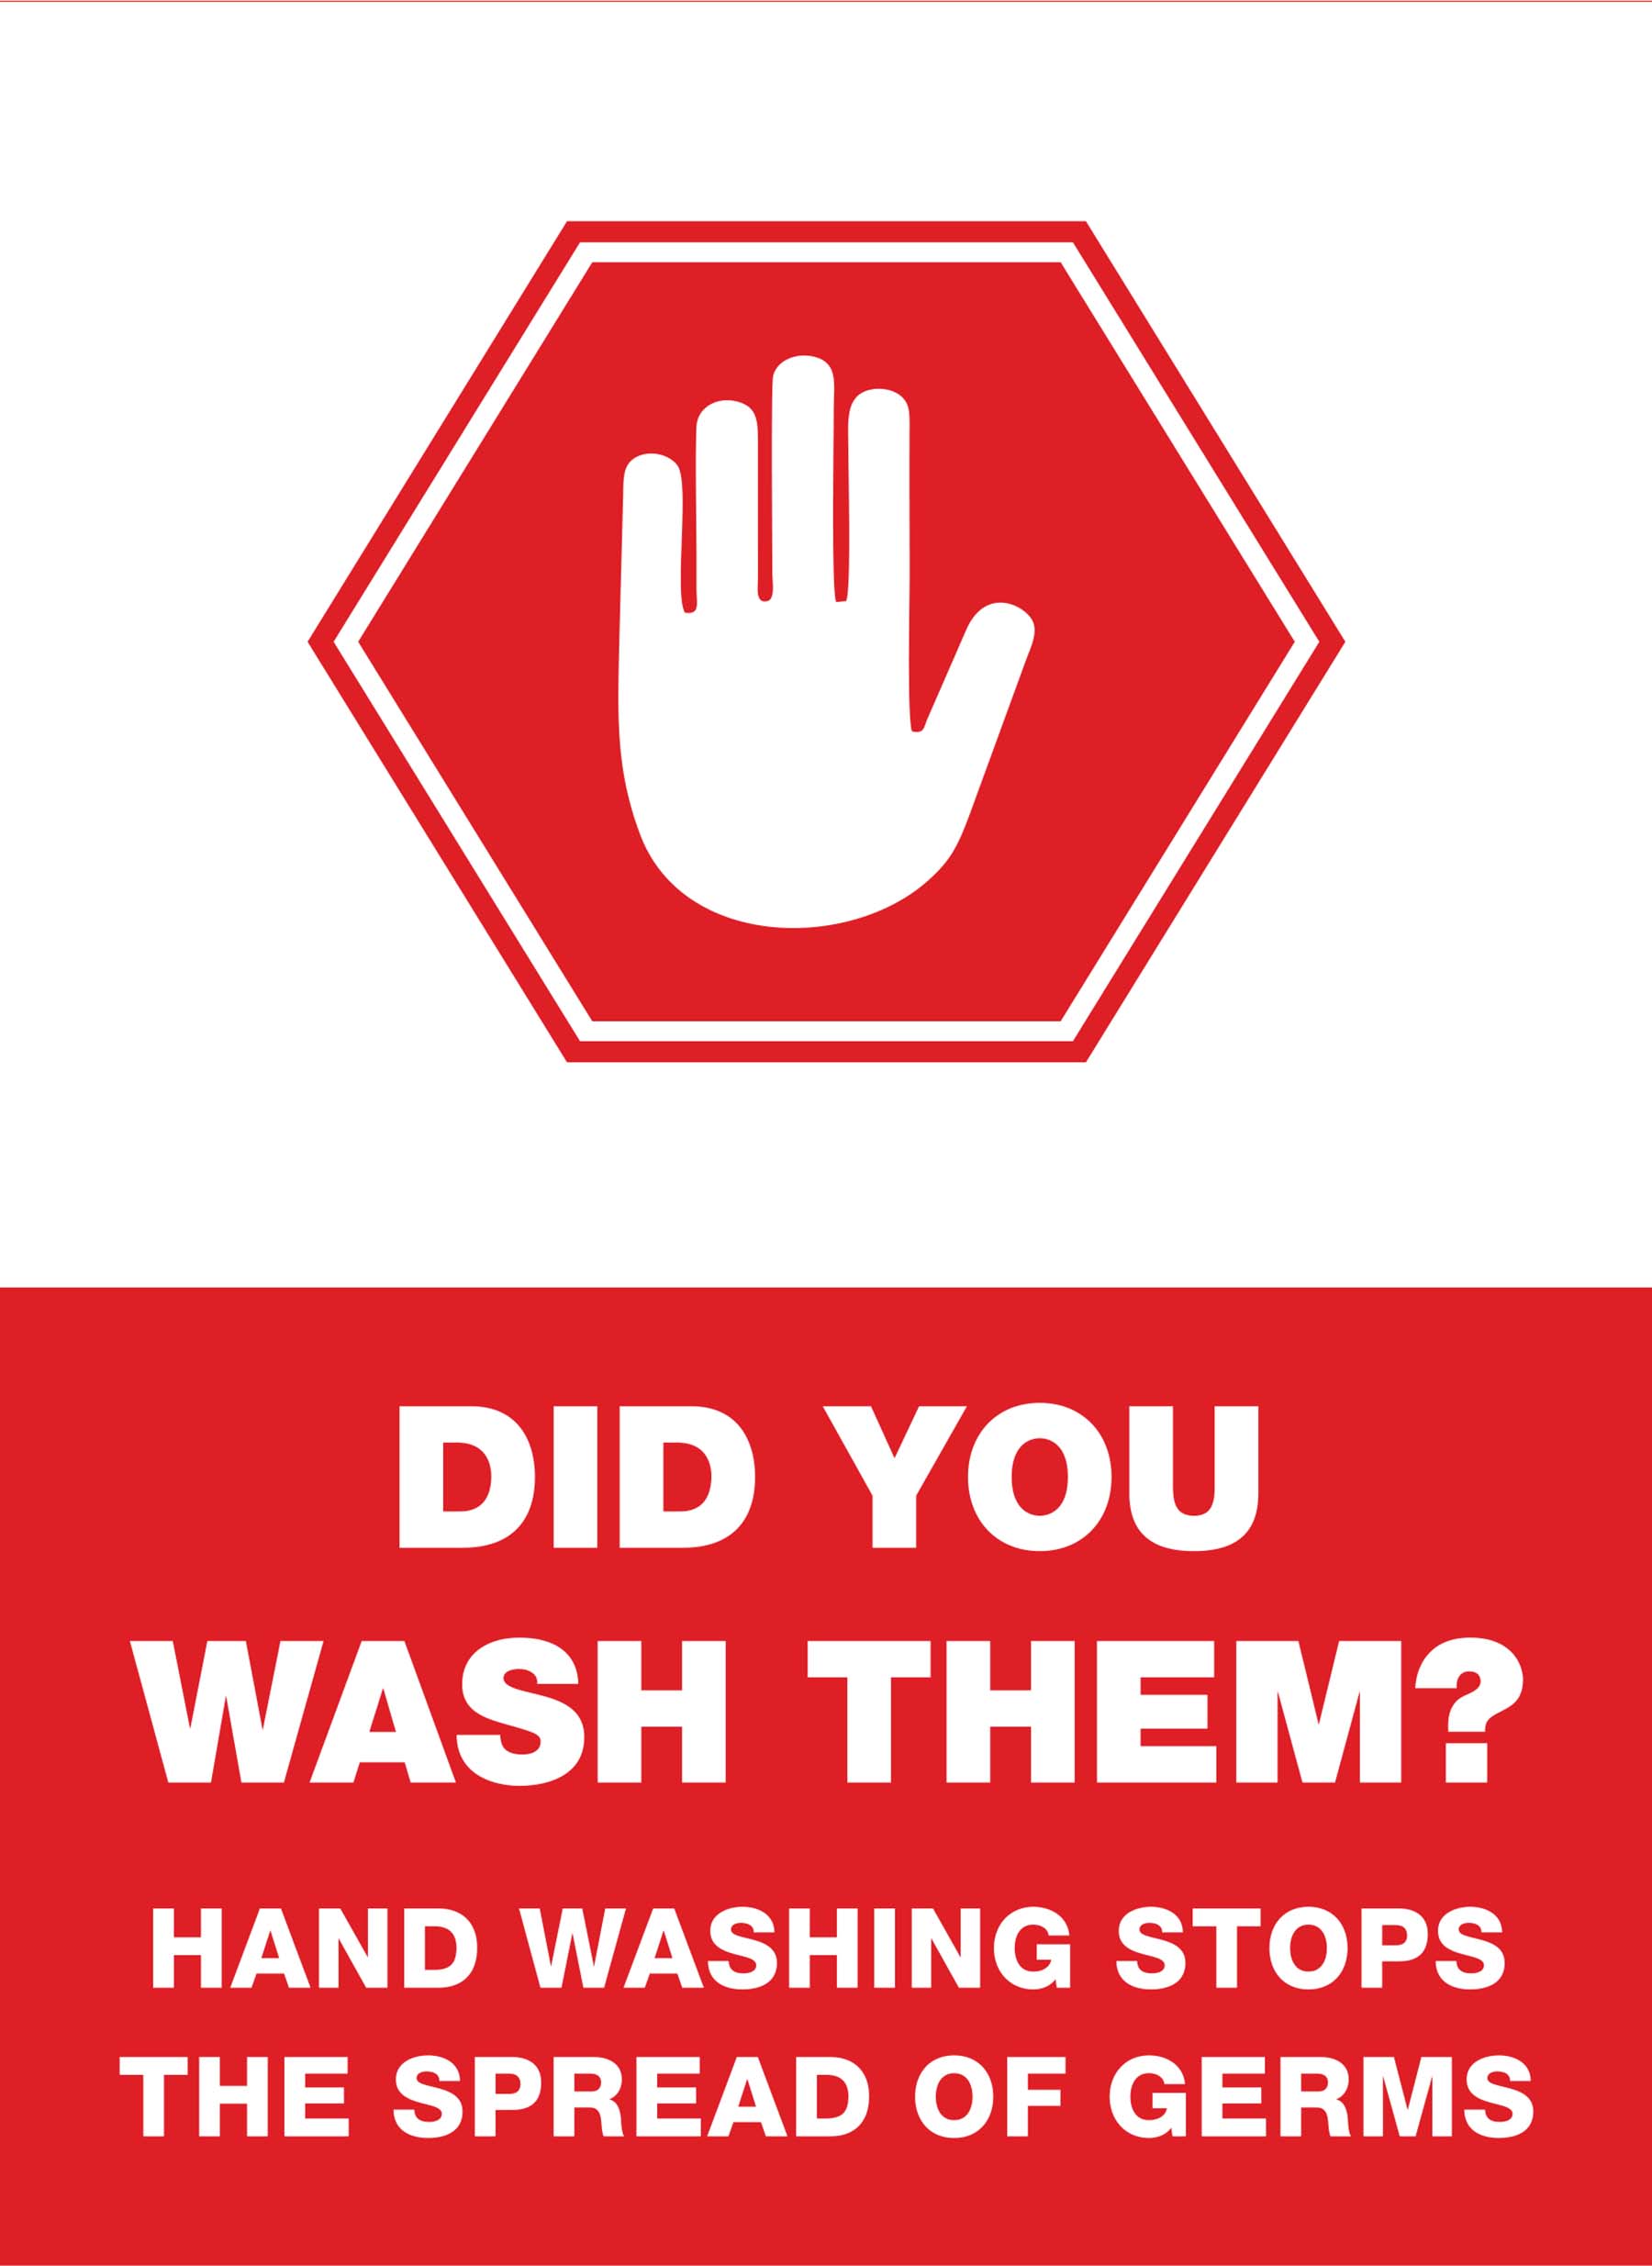 SOA - Stop Wash Hands 6" x 8" Decal - 4 pack